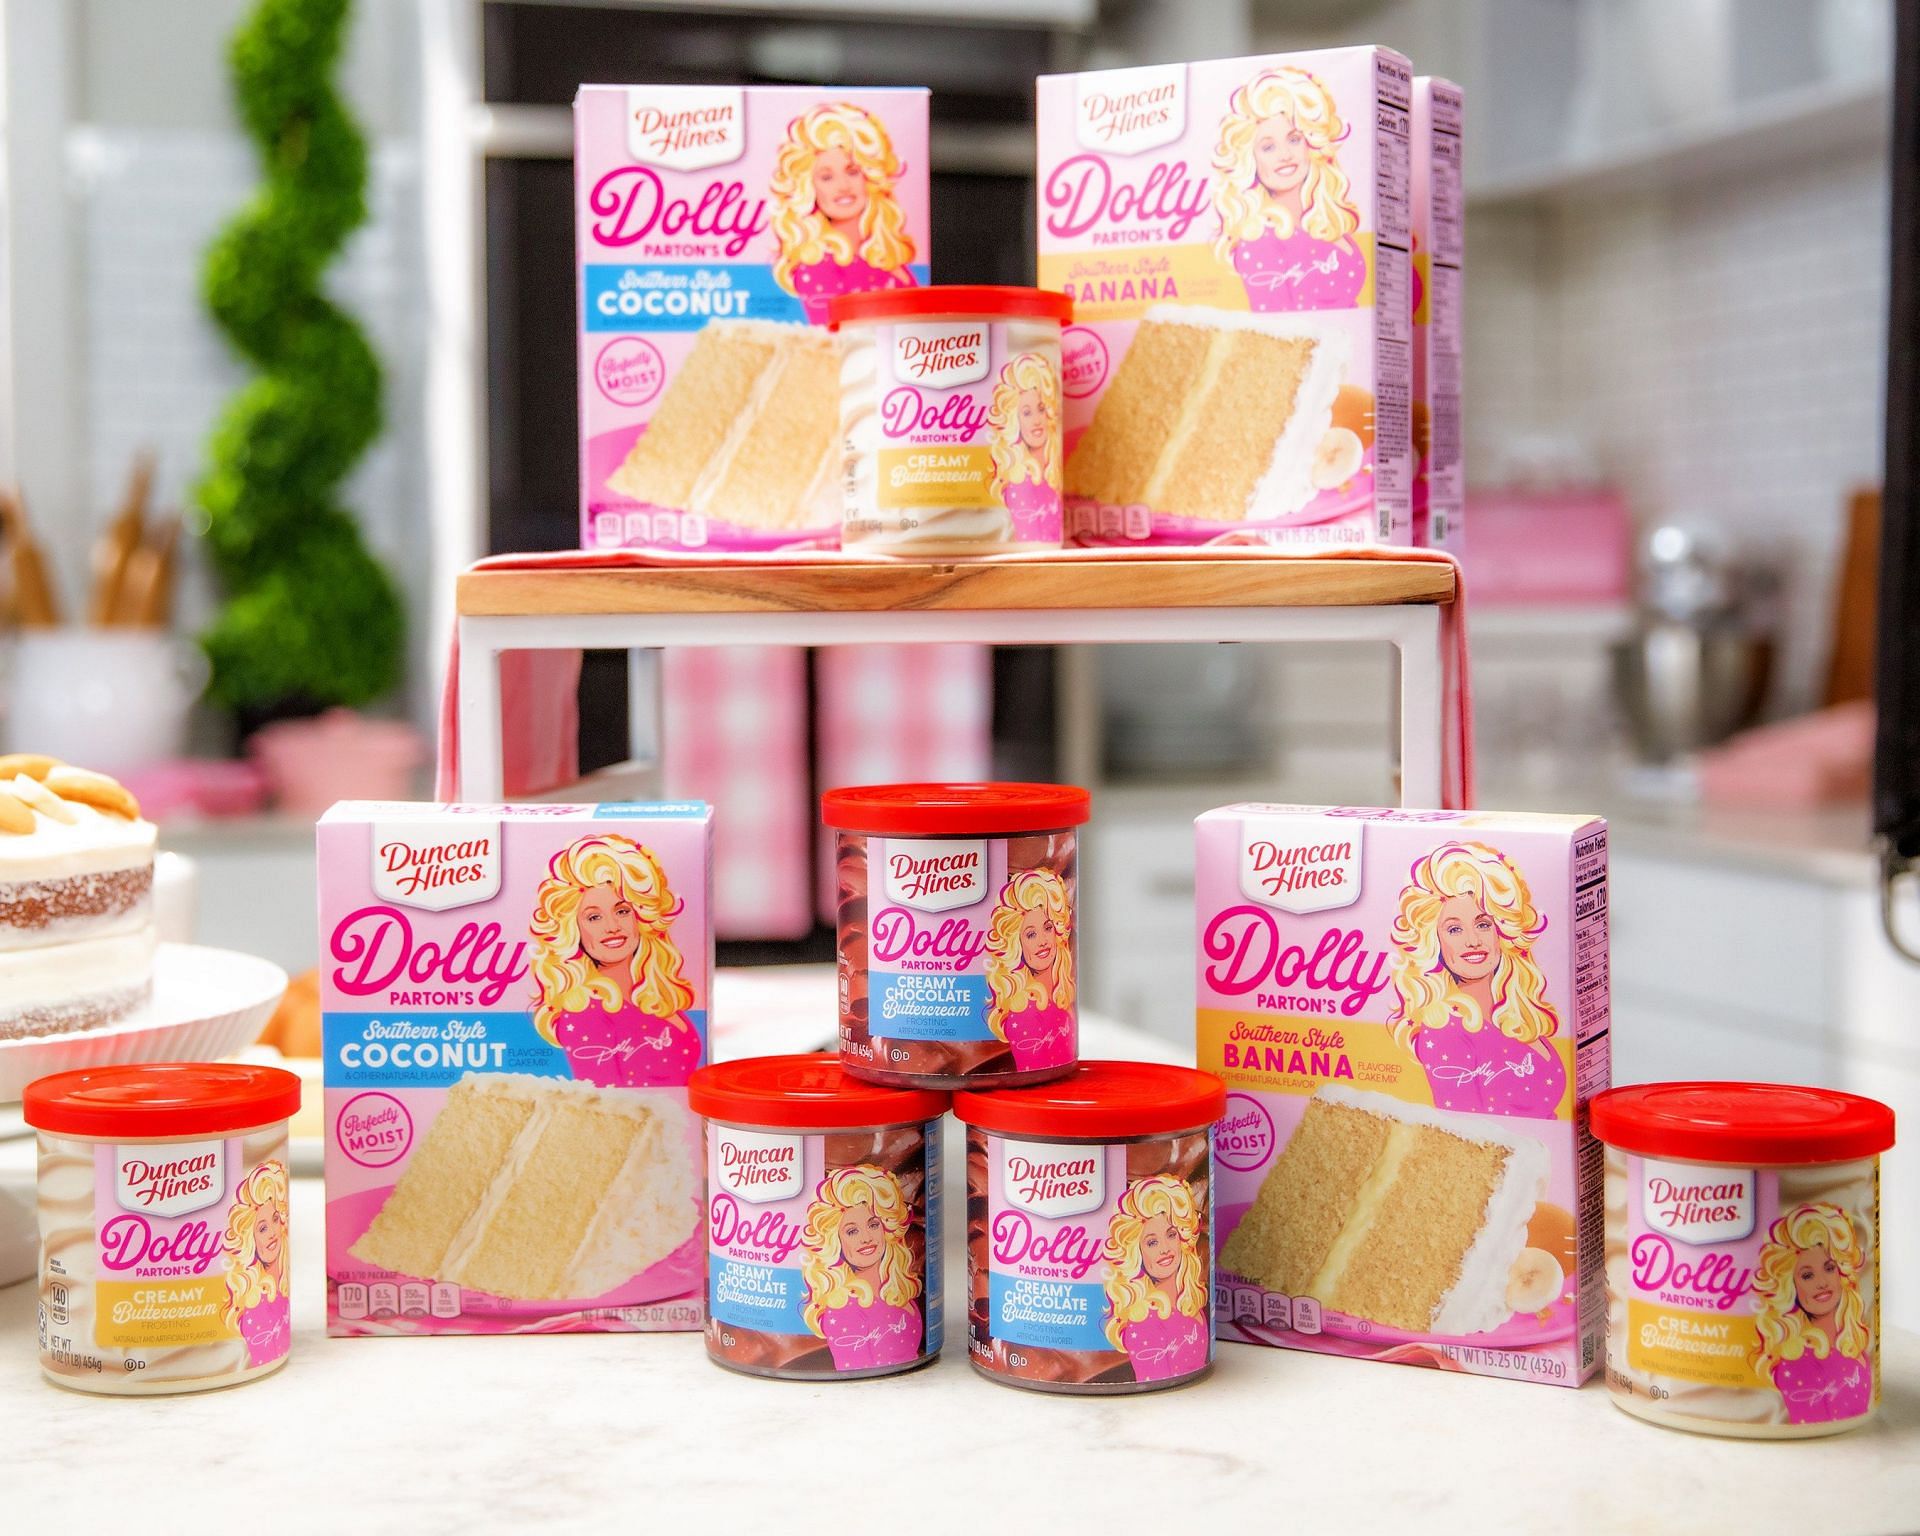 Dolly Parton and Duncan Hines cake mixes and frostings (Image via Duncan Hines)